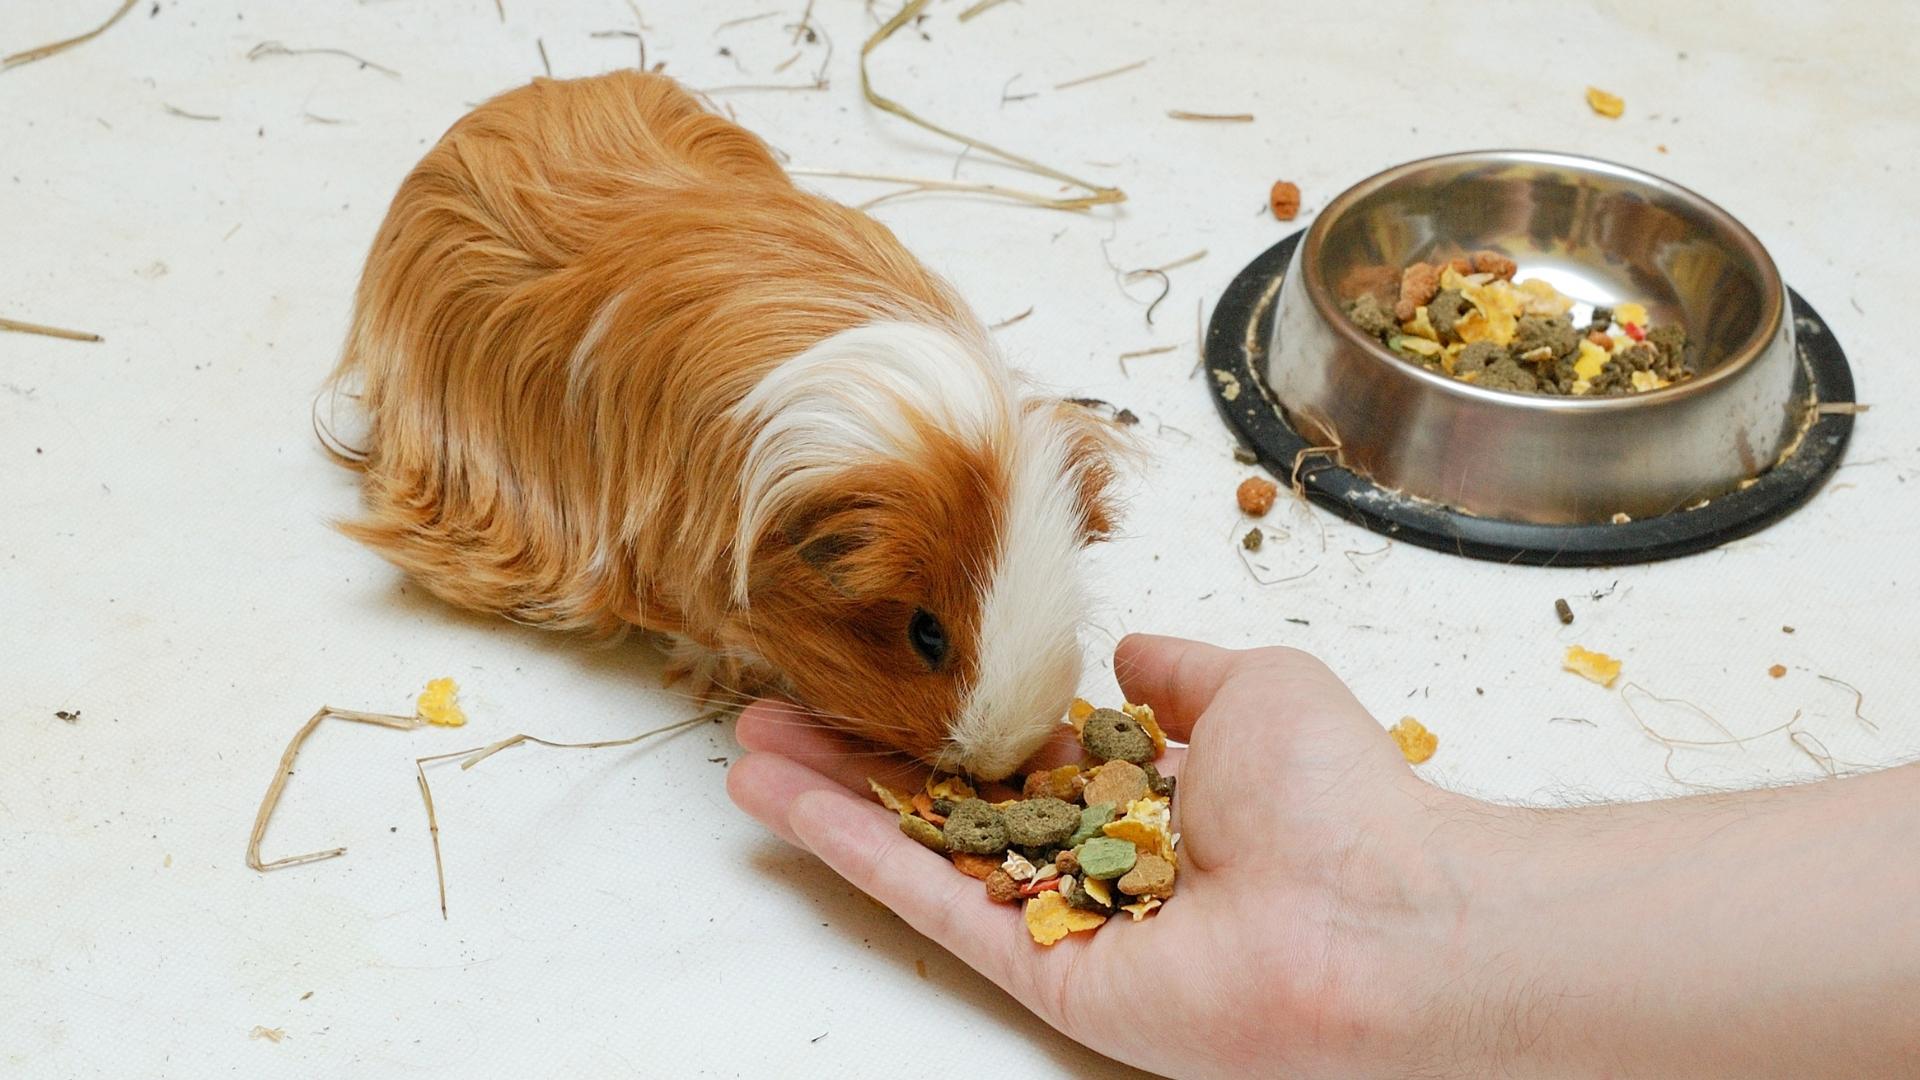 Some Points to Consider When Choosing Guinea Pig Food